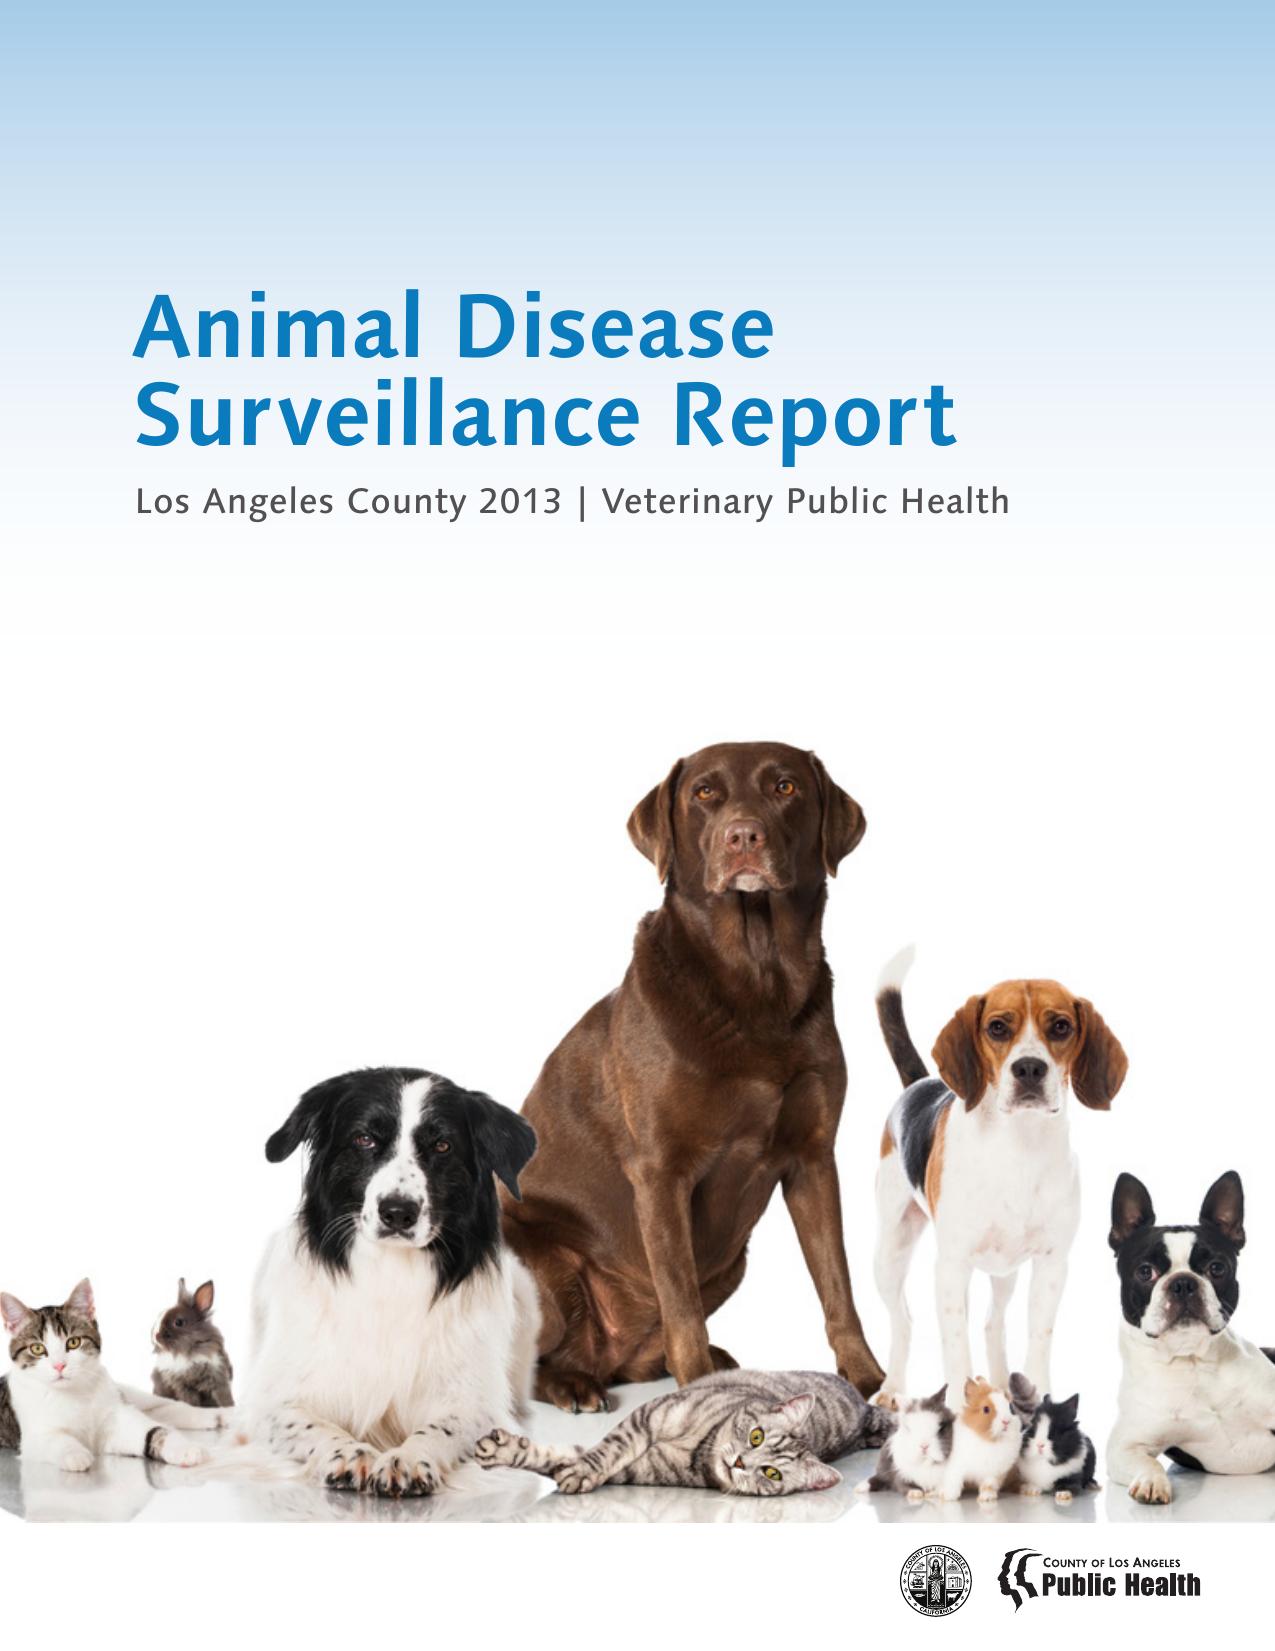 2013 Animal Disease Surveillance Report for Los Angeles County